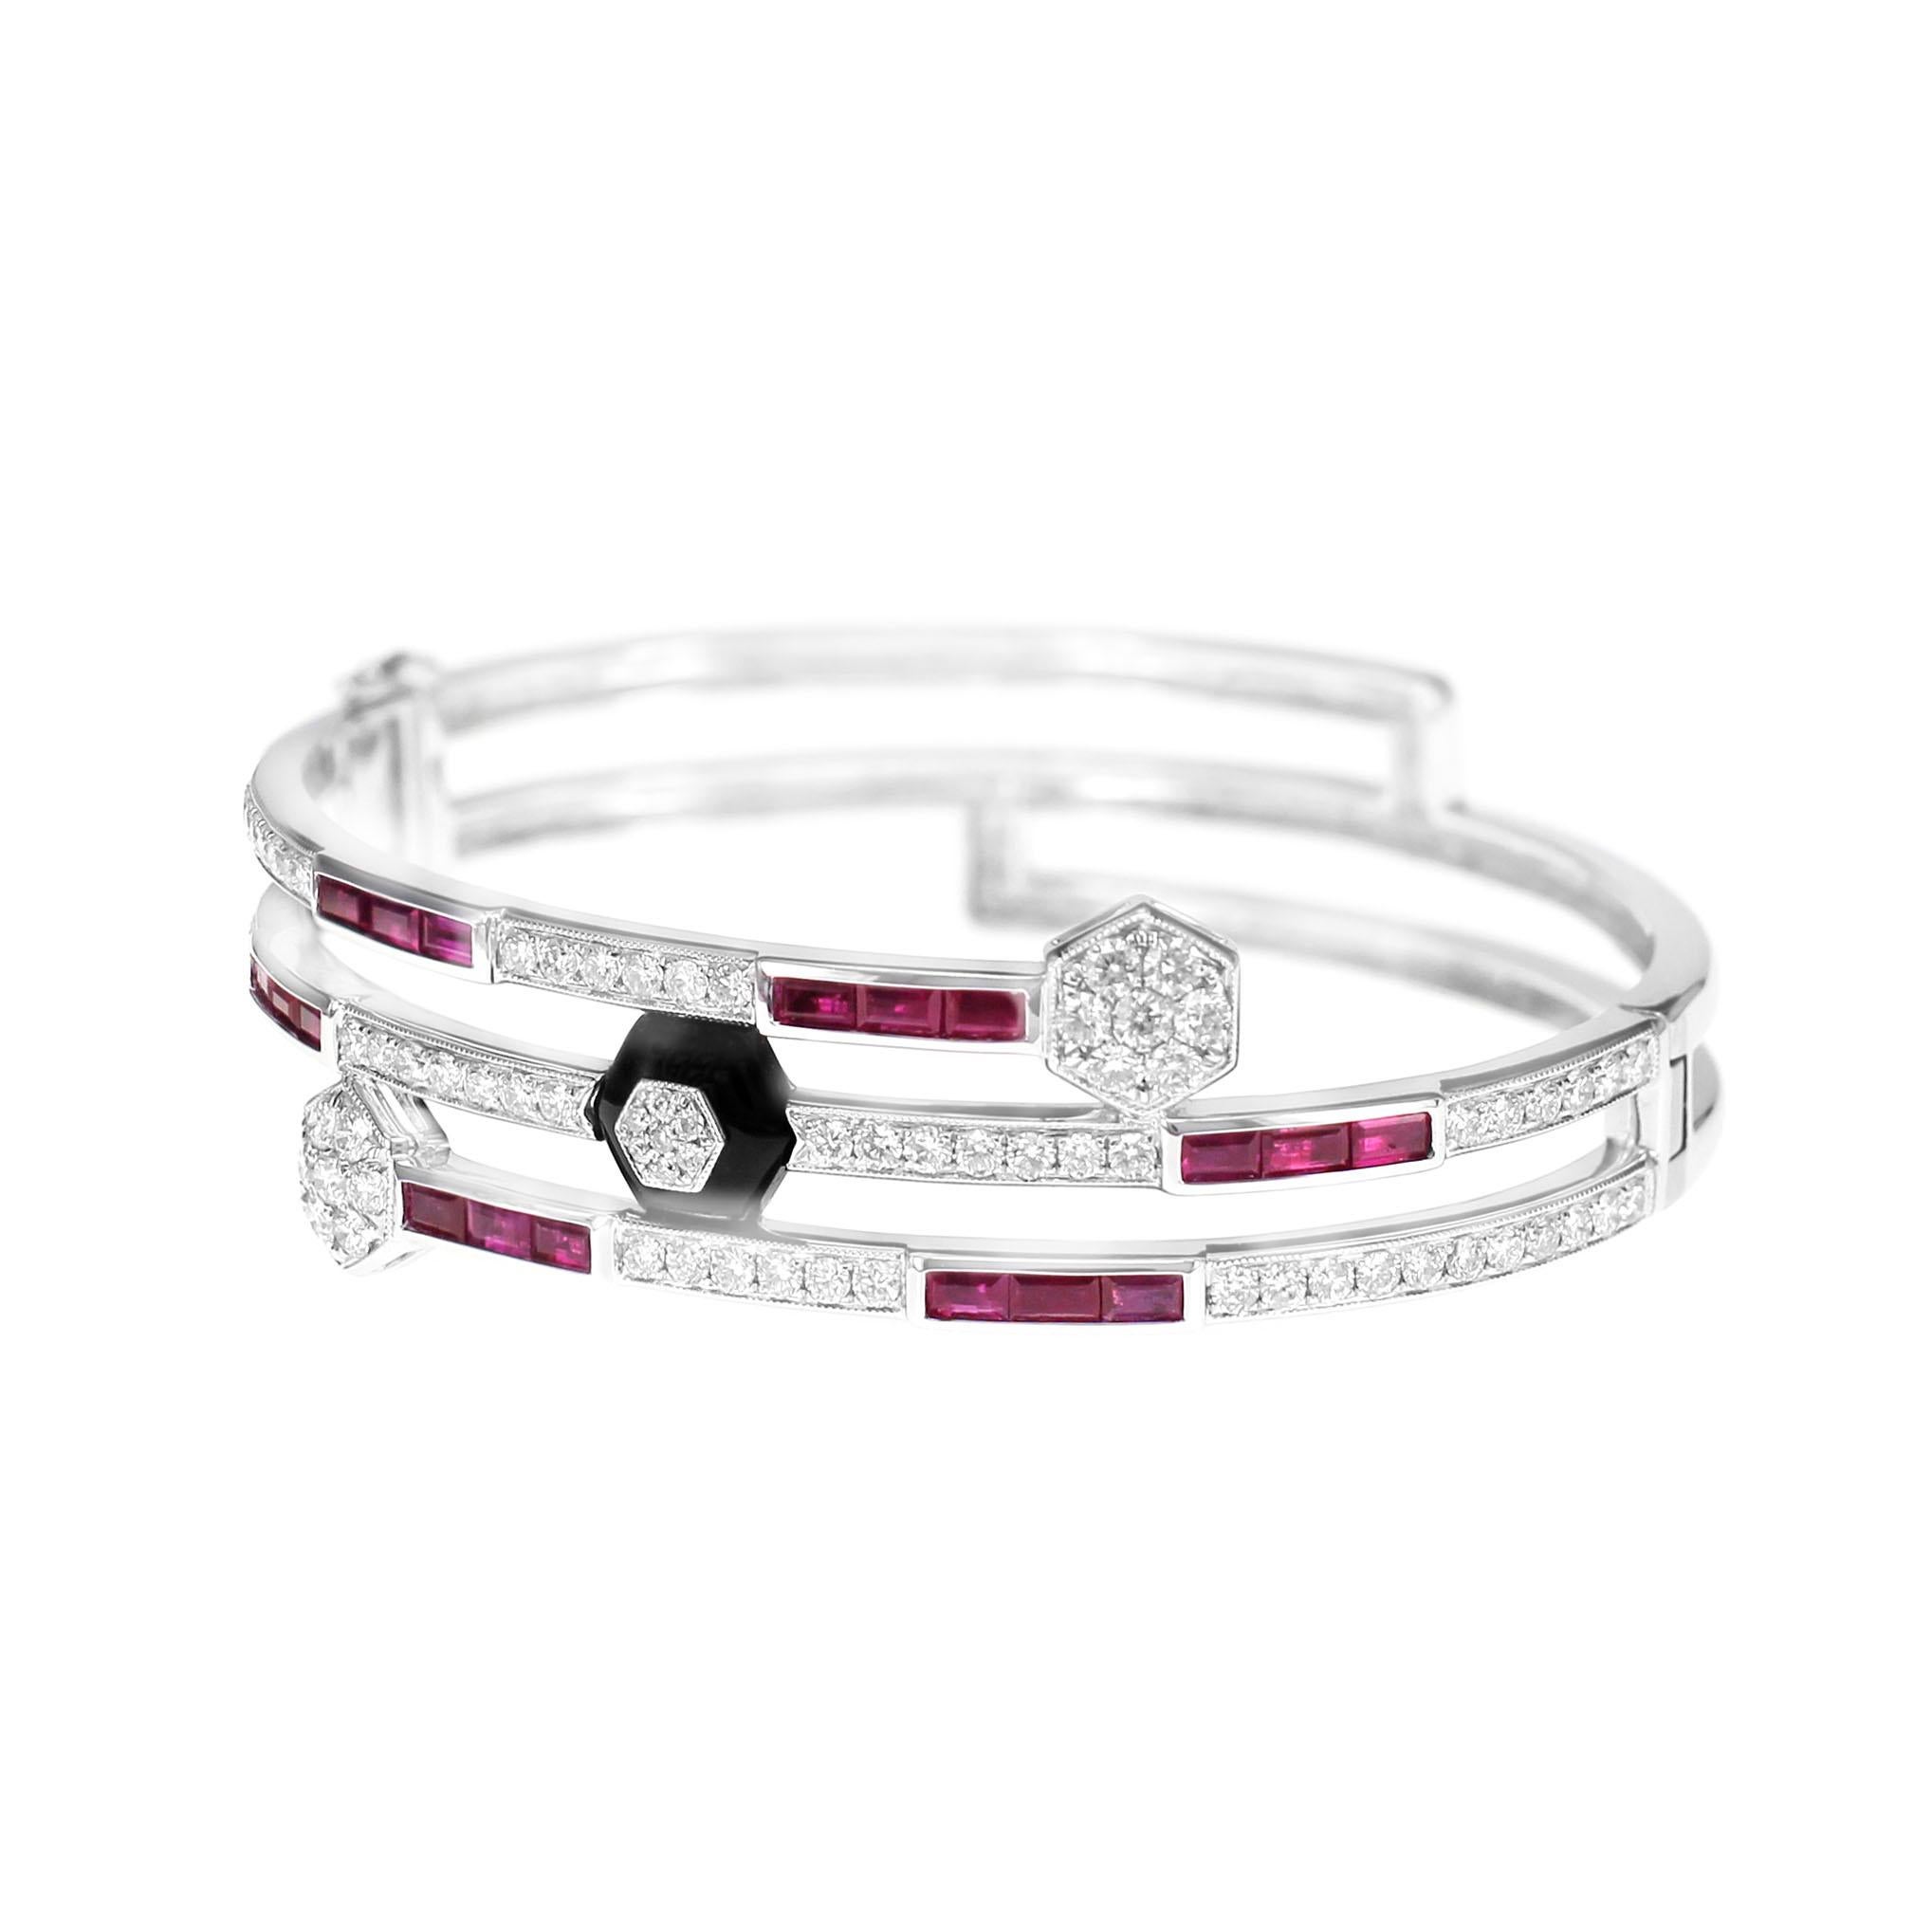 A stunning combination of ruby, onyx and white round diamond are assembled together to create this master piece art deco style design. The bangle is a Malpani recommended design as it sits beautifully on your wrist. 
The details of the diamond are